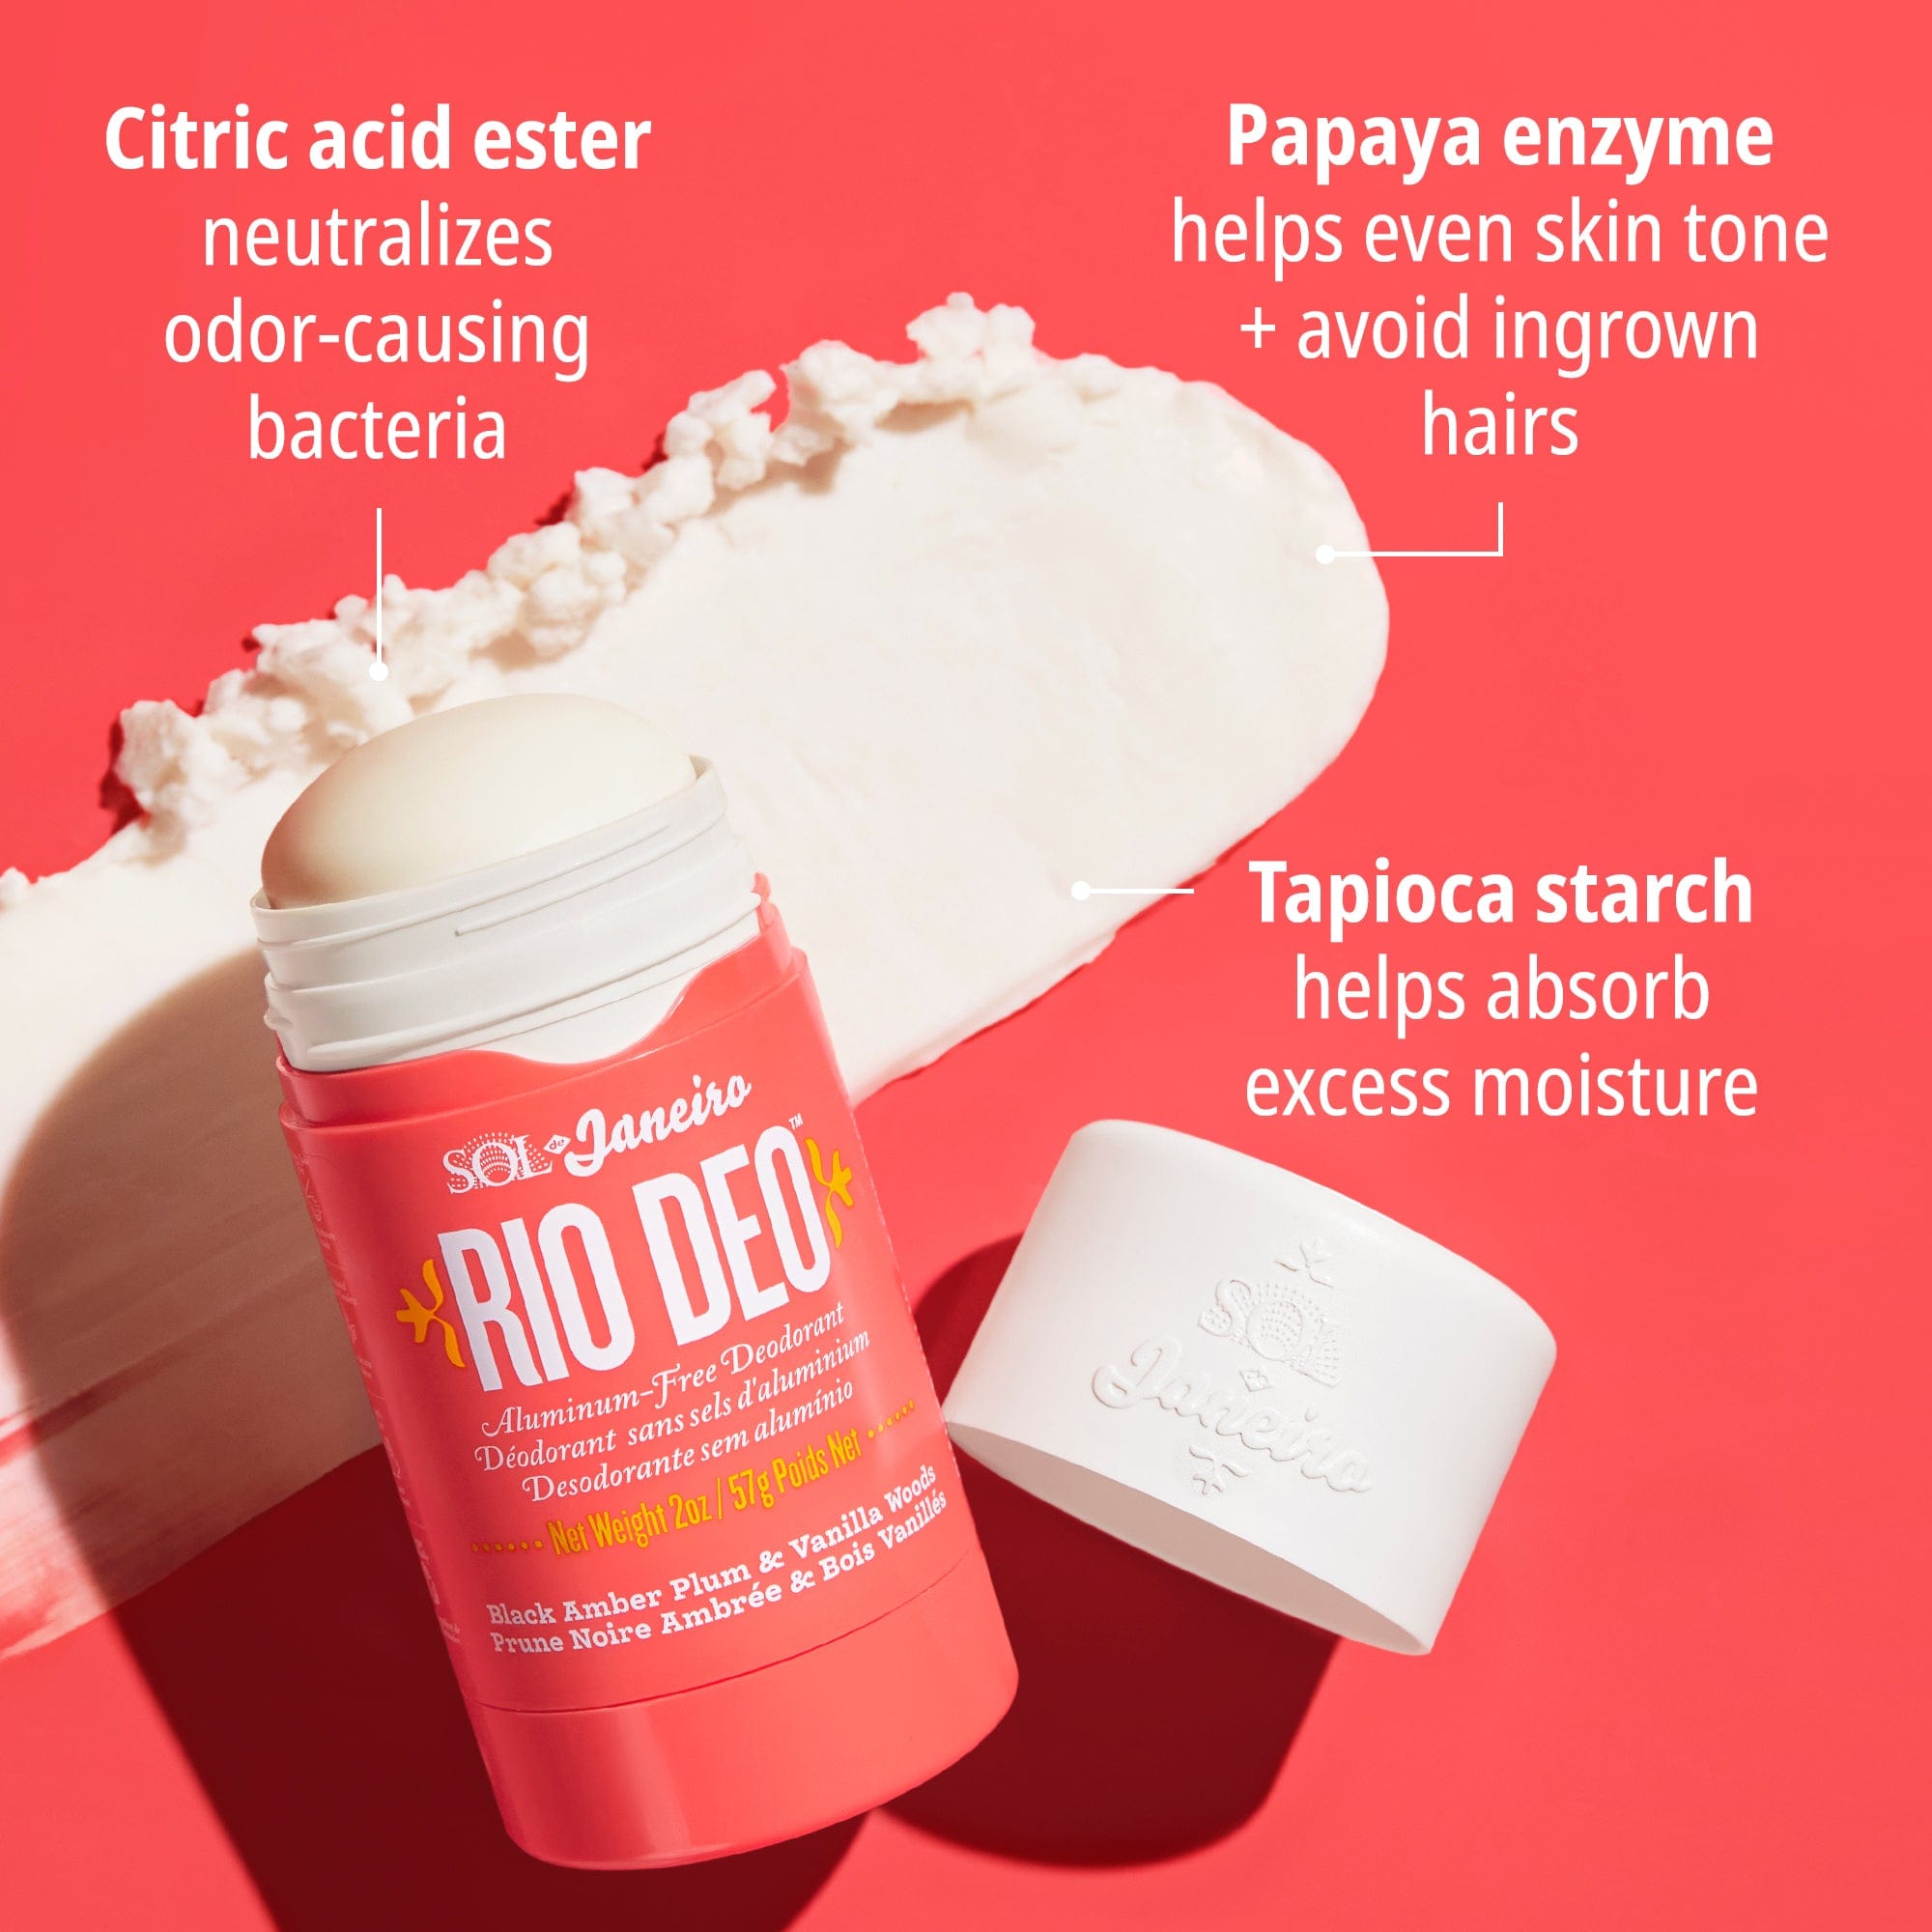 Citric acid easter: neutralizes odor-causing bacteria | Papaya Enzyme: helps even skin tone + avoid ingrown hairs | Tapioca Starch: helps absorb excess moisture